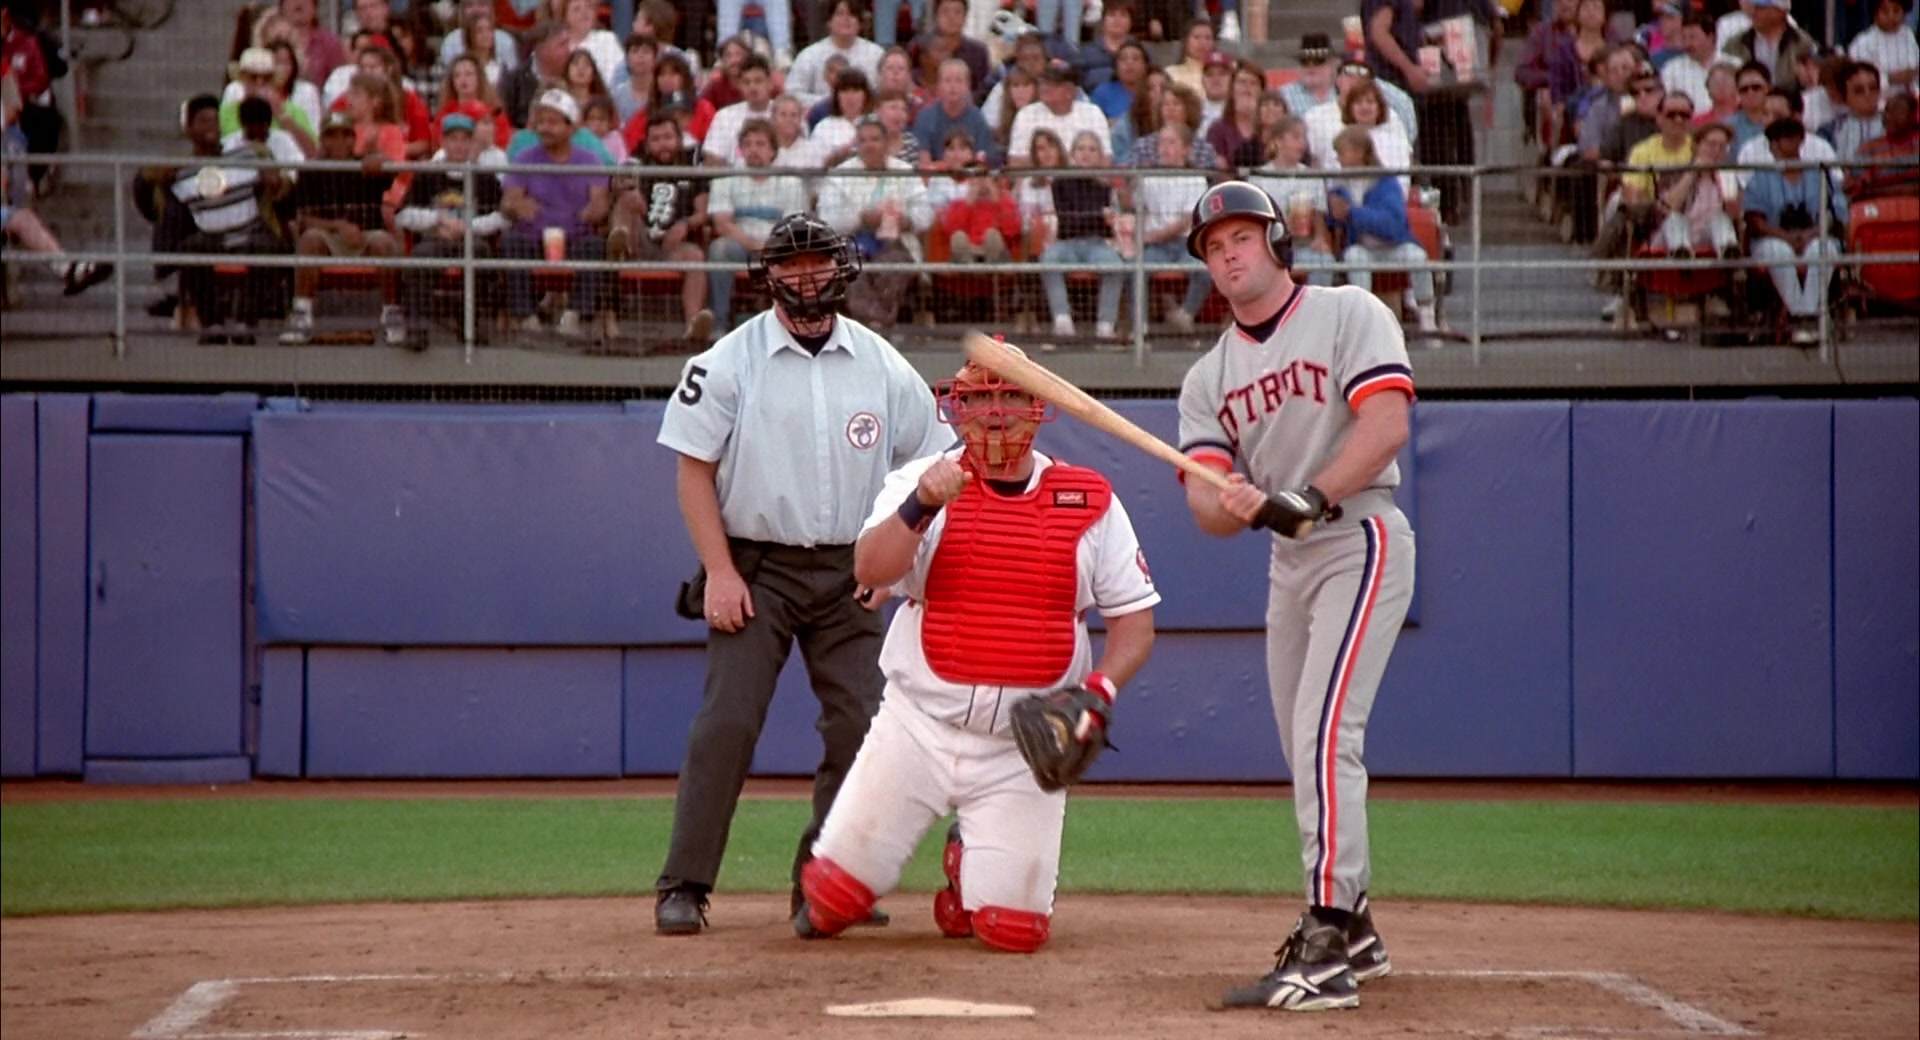 Reebok Baseball Cleats In The Outfield (1994)